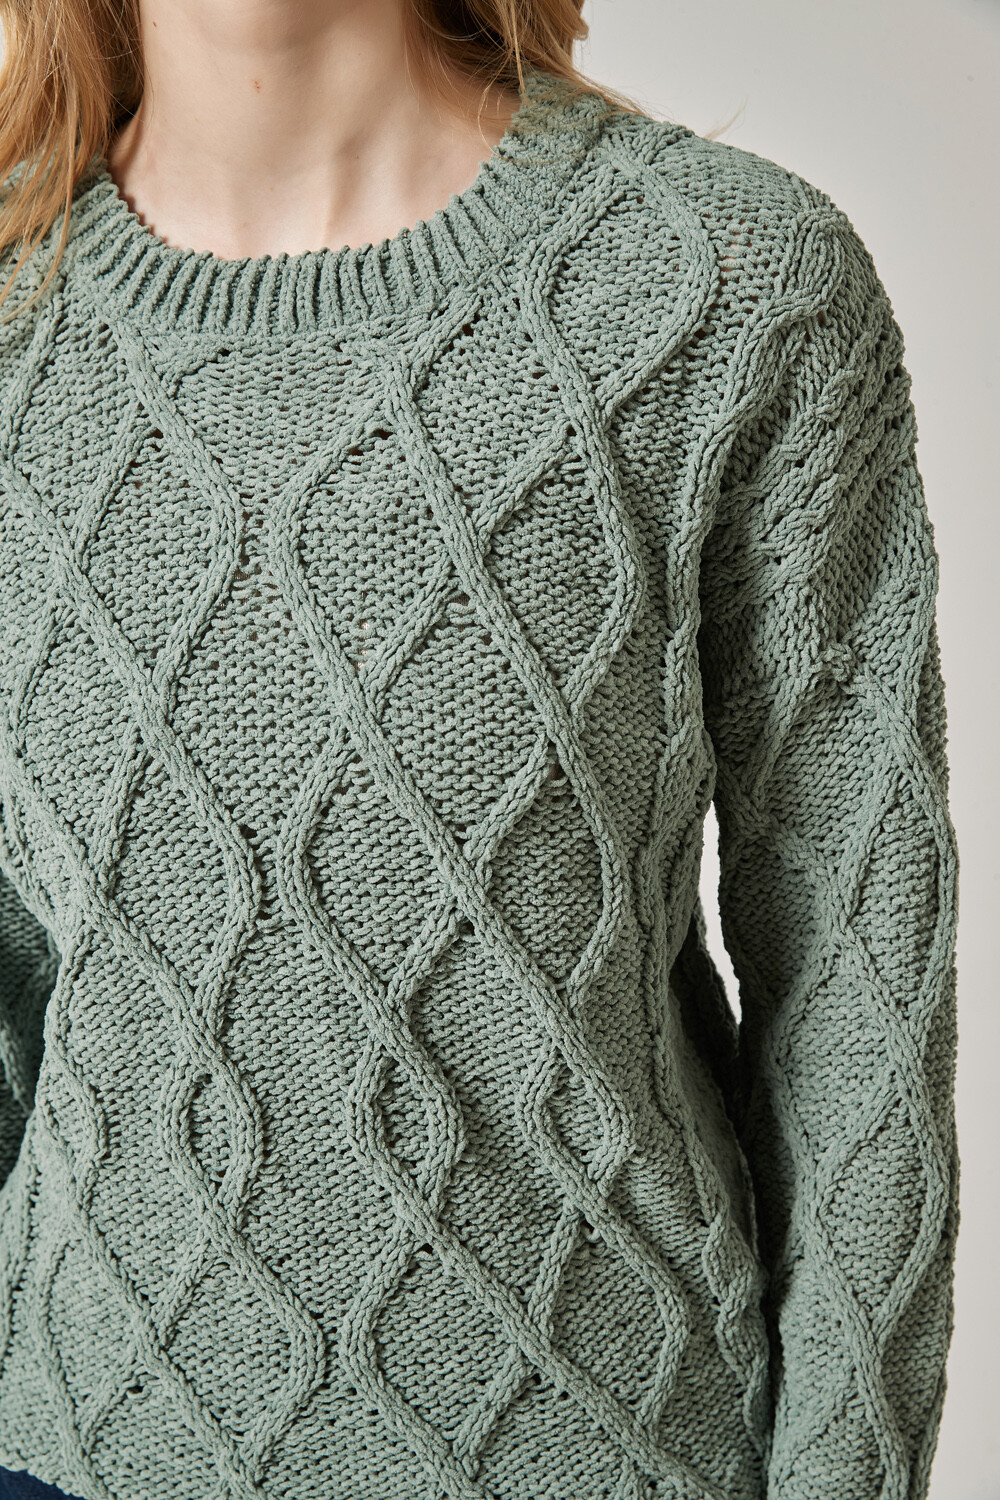 Sweater Loanina Verde Grisaceo